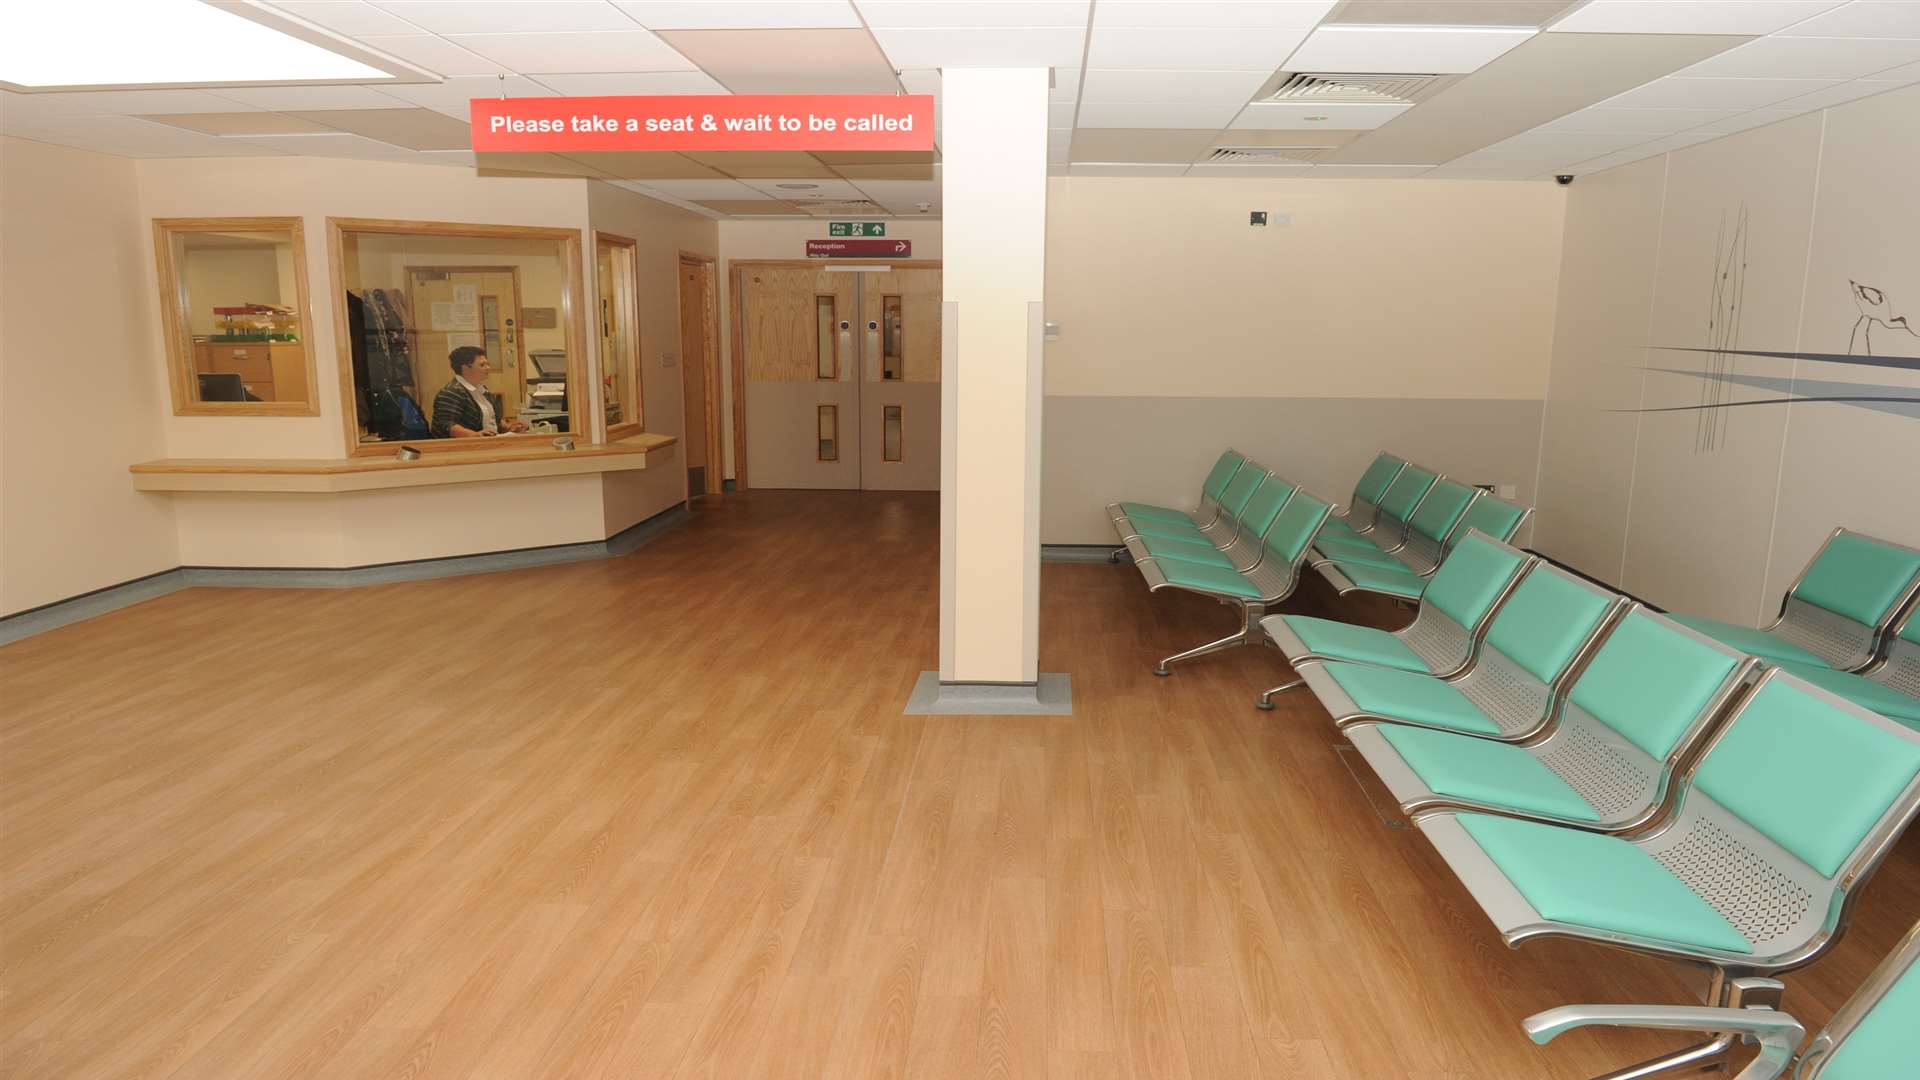 The new waiting room in the majors department at A&E